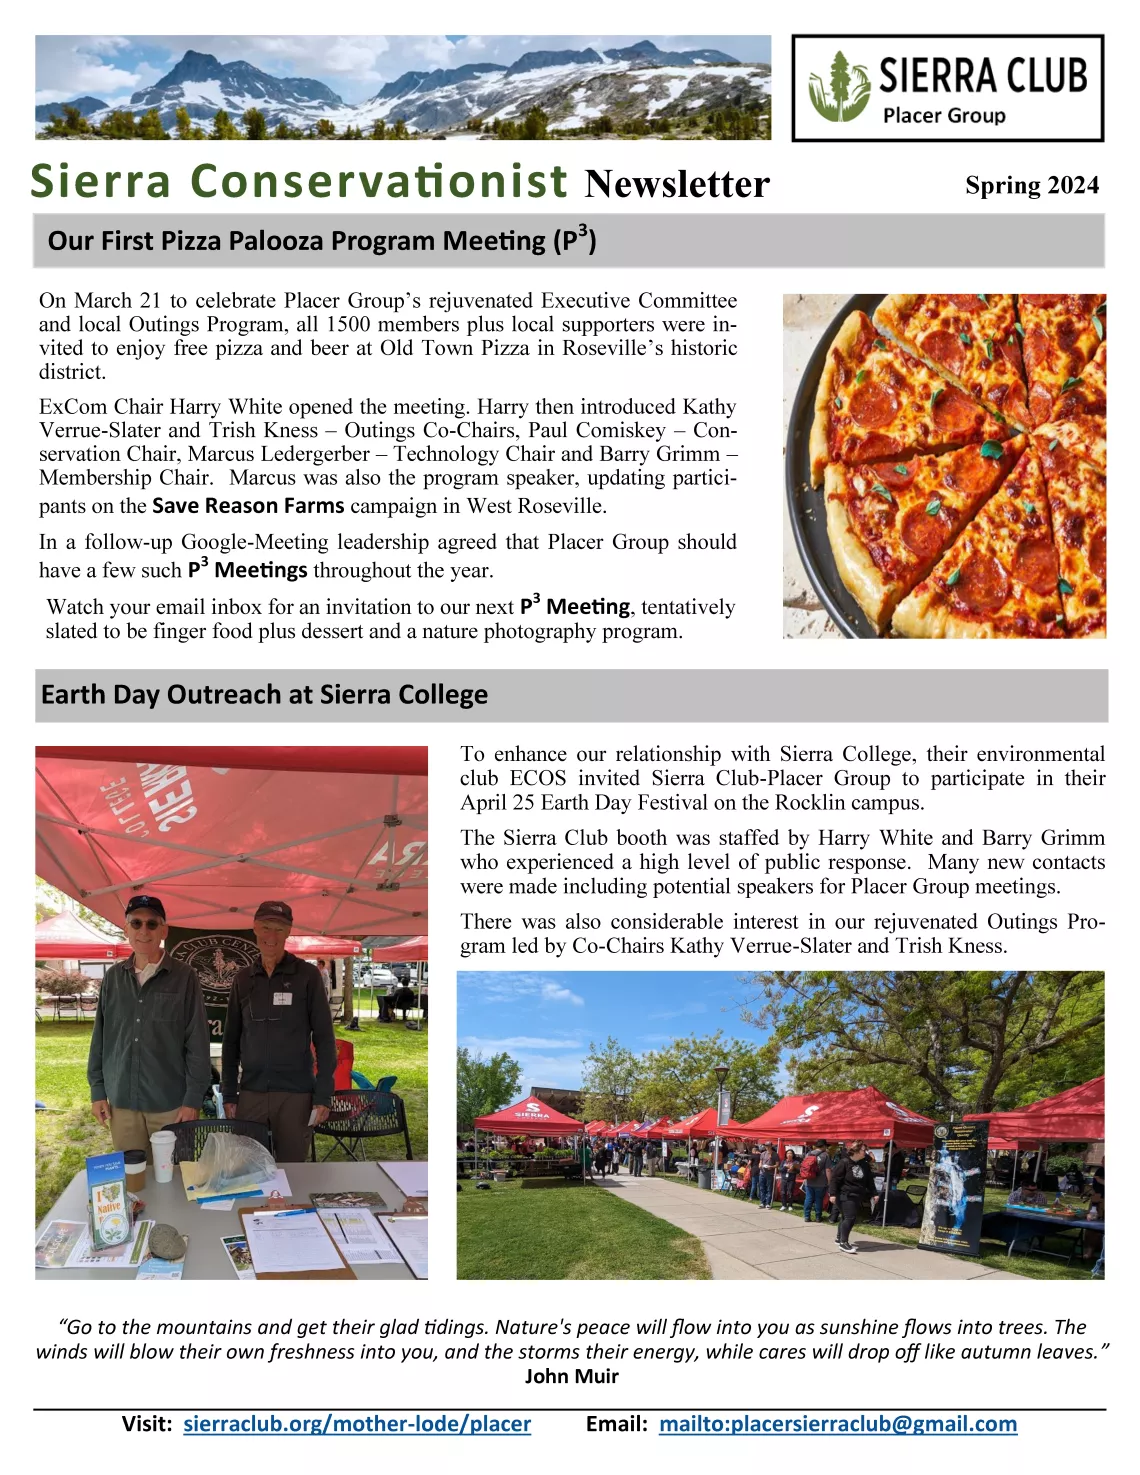 The Sierra Conservationist - Spring 2024 - Page 2